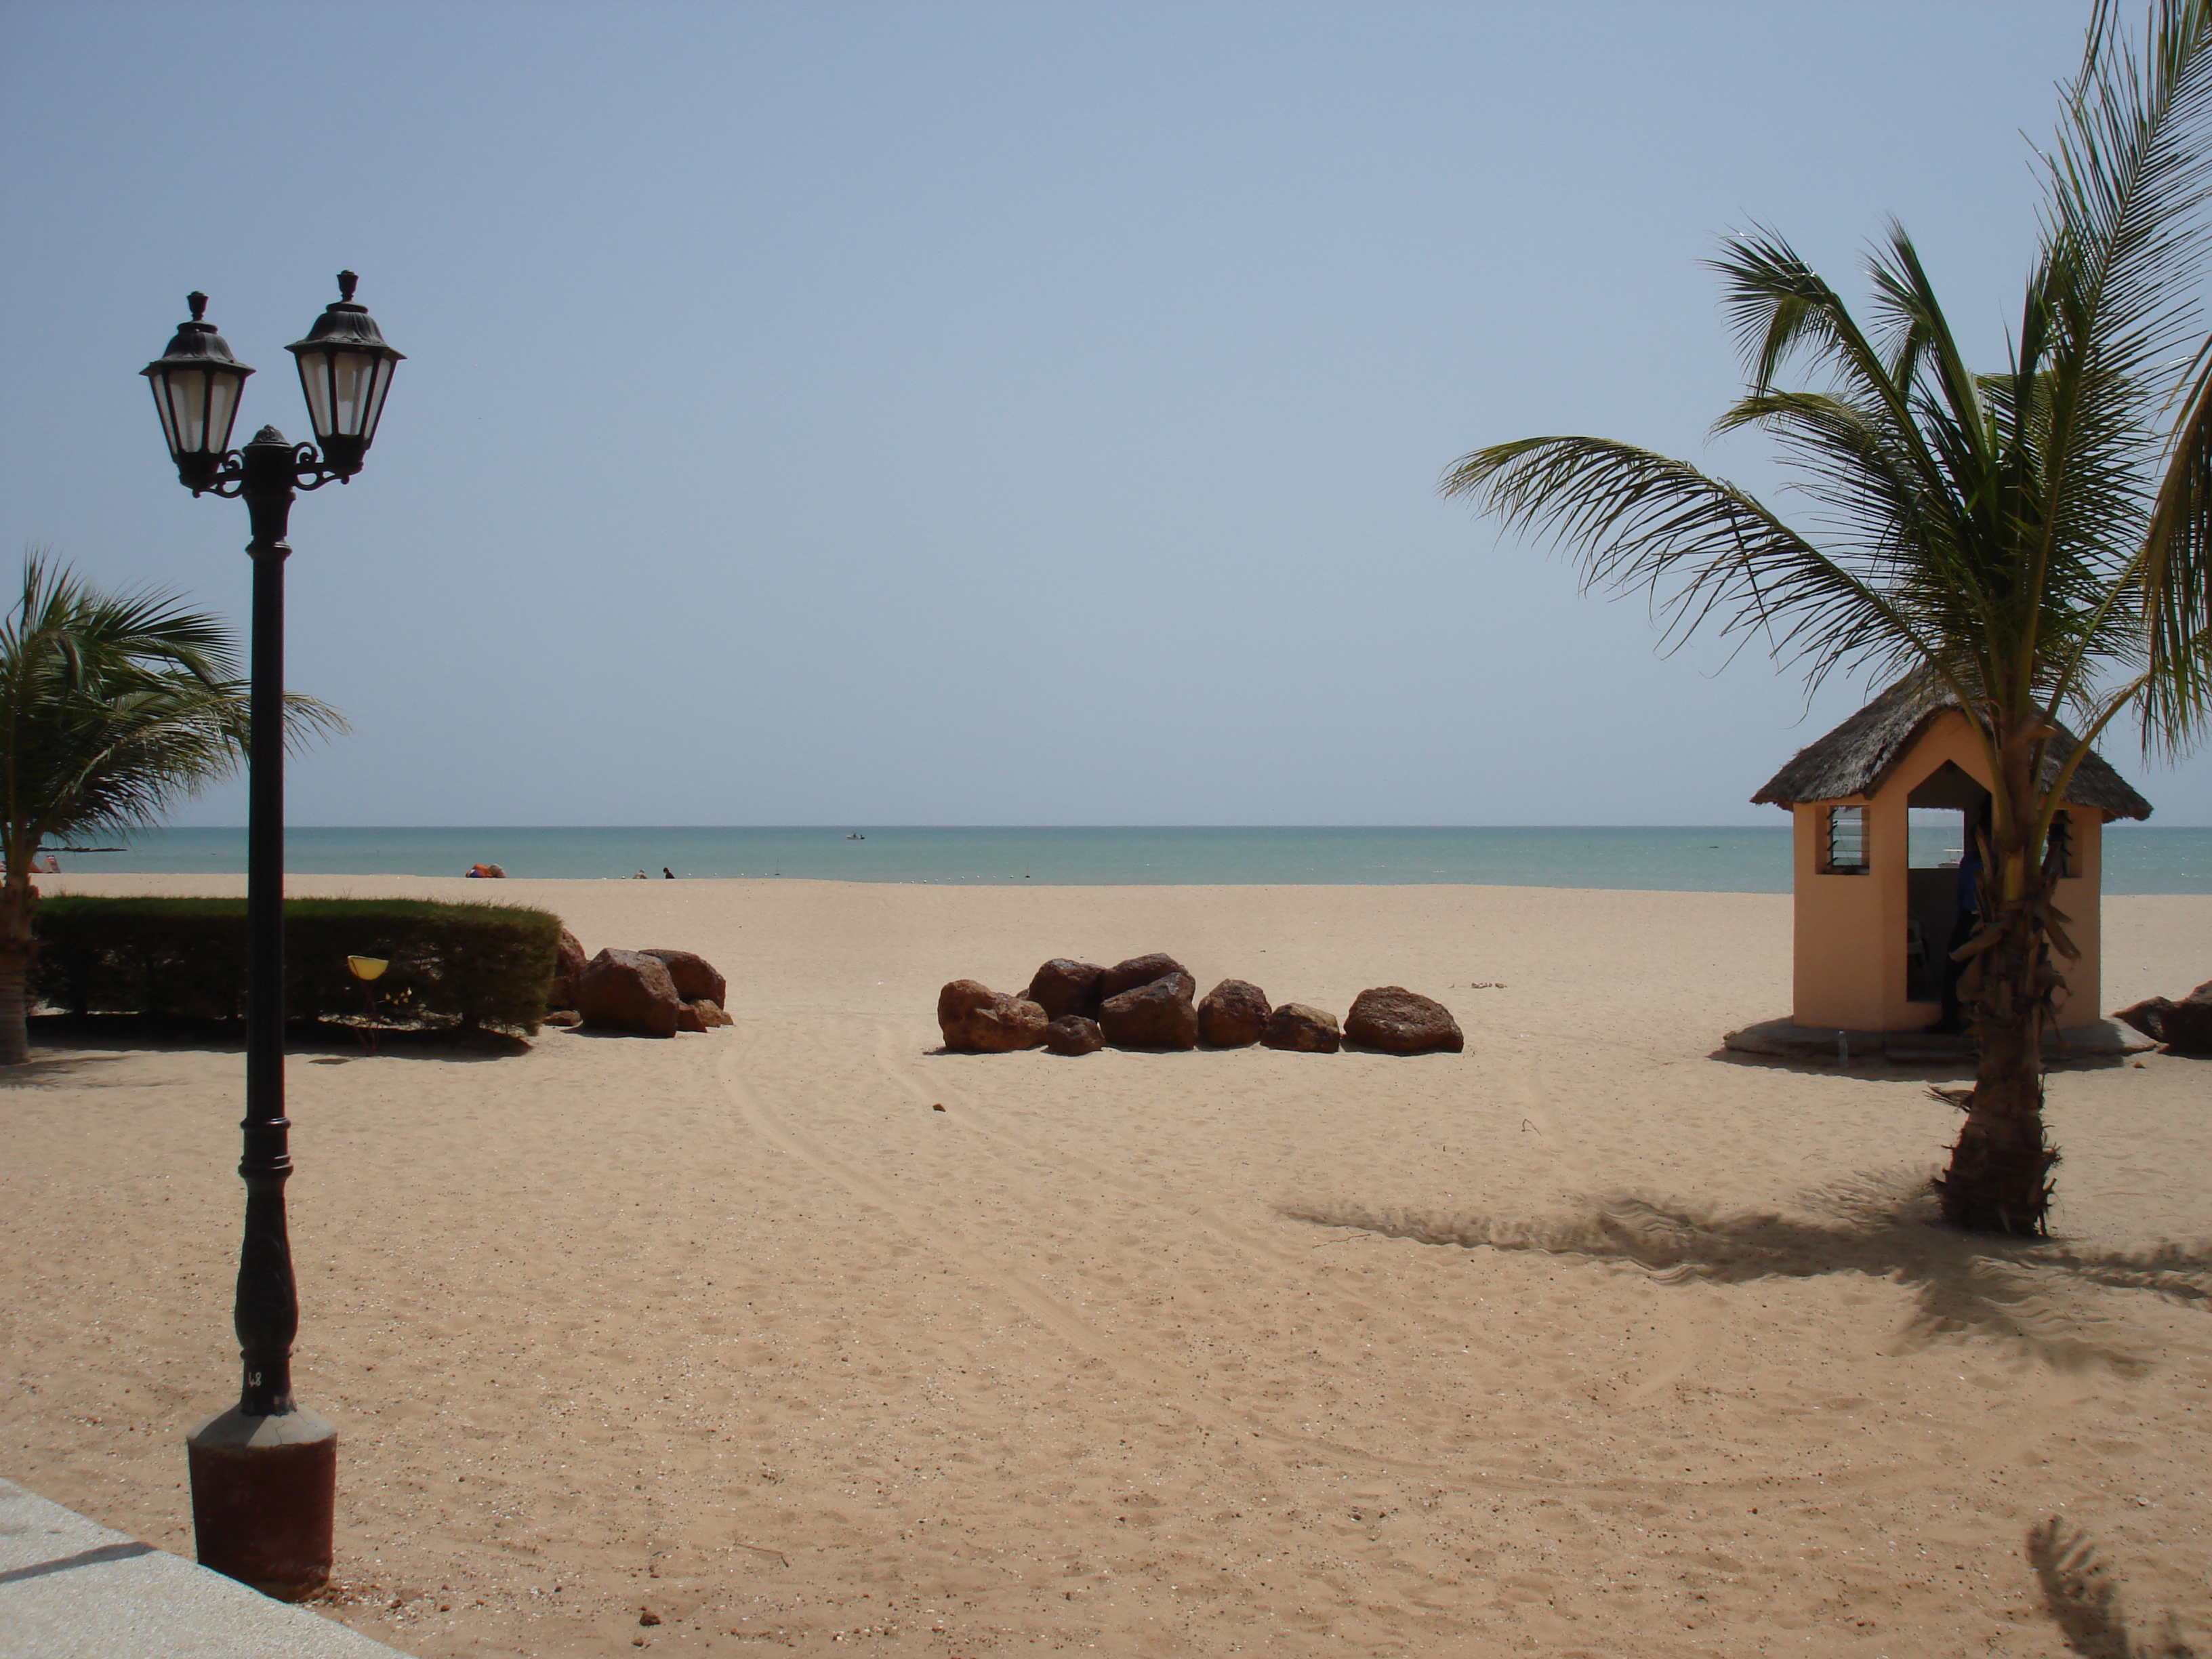 typical-beach-view-in-saly-demo-site.jpg